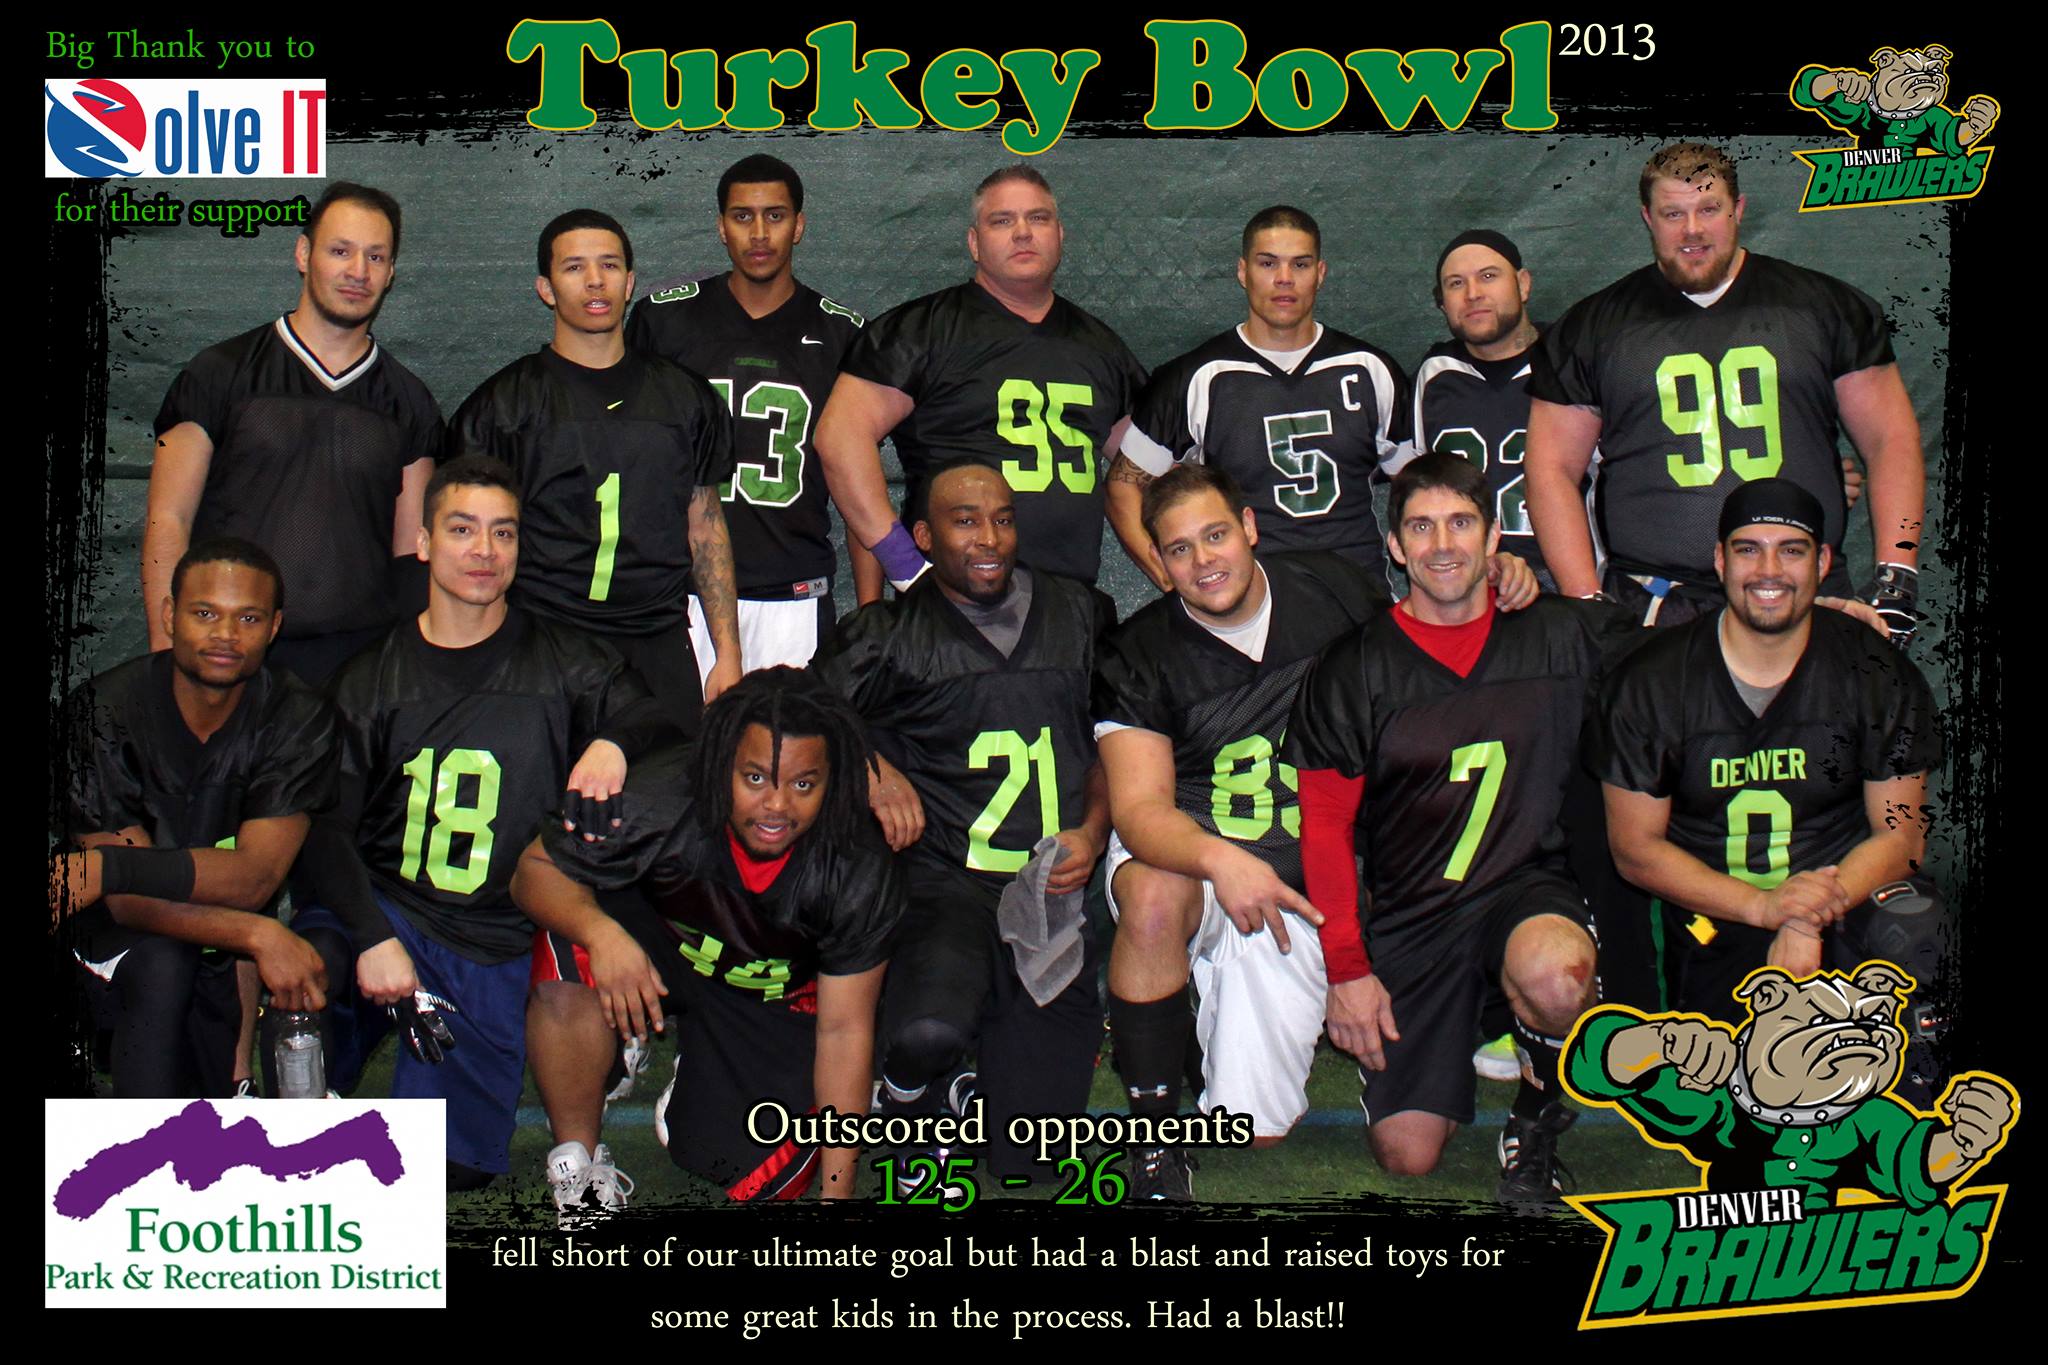 Solve IT's community involvement includes sponsorship in the 2013 Turkey Bowl.